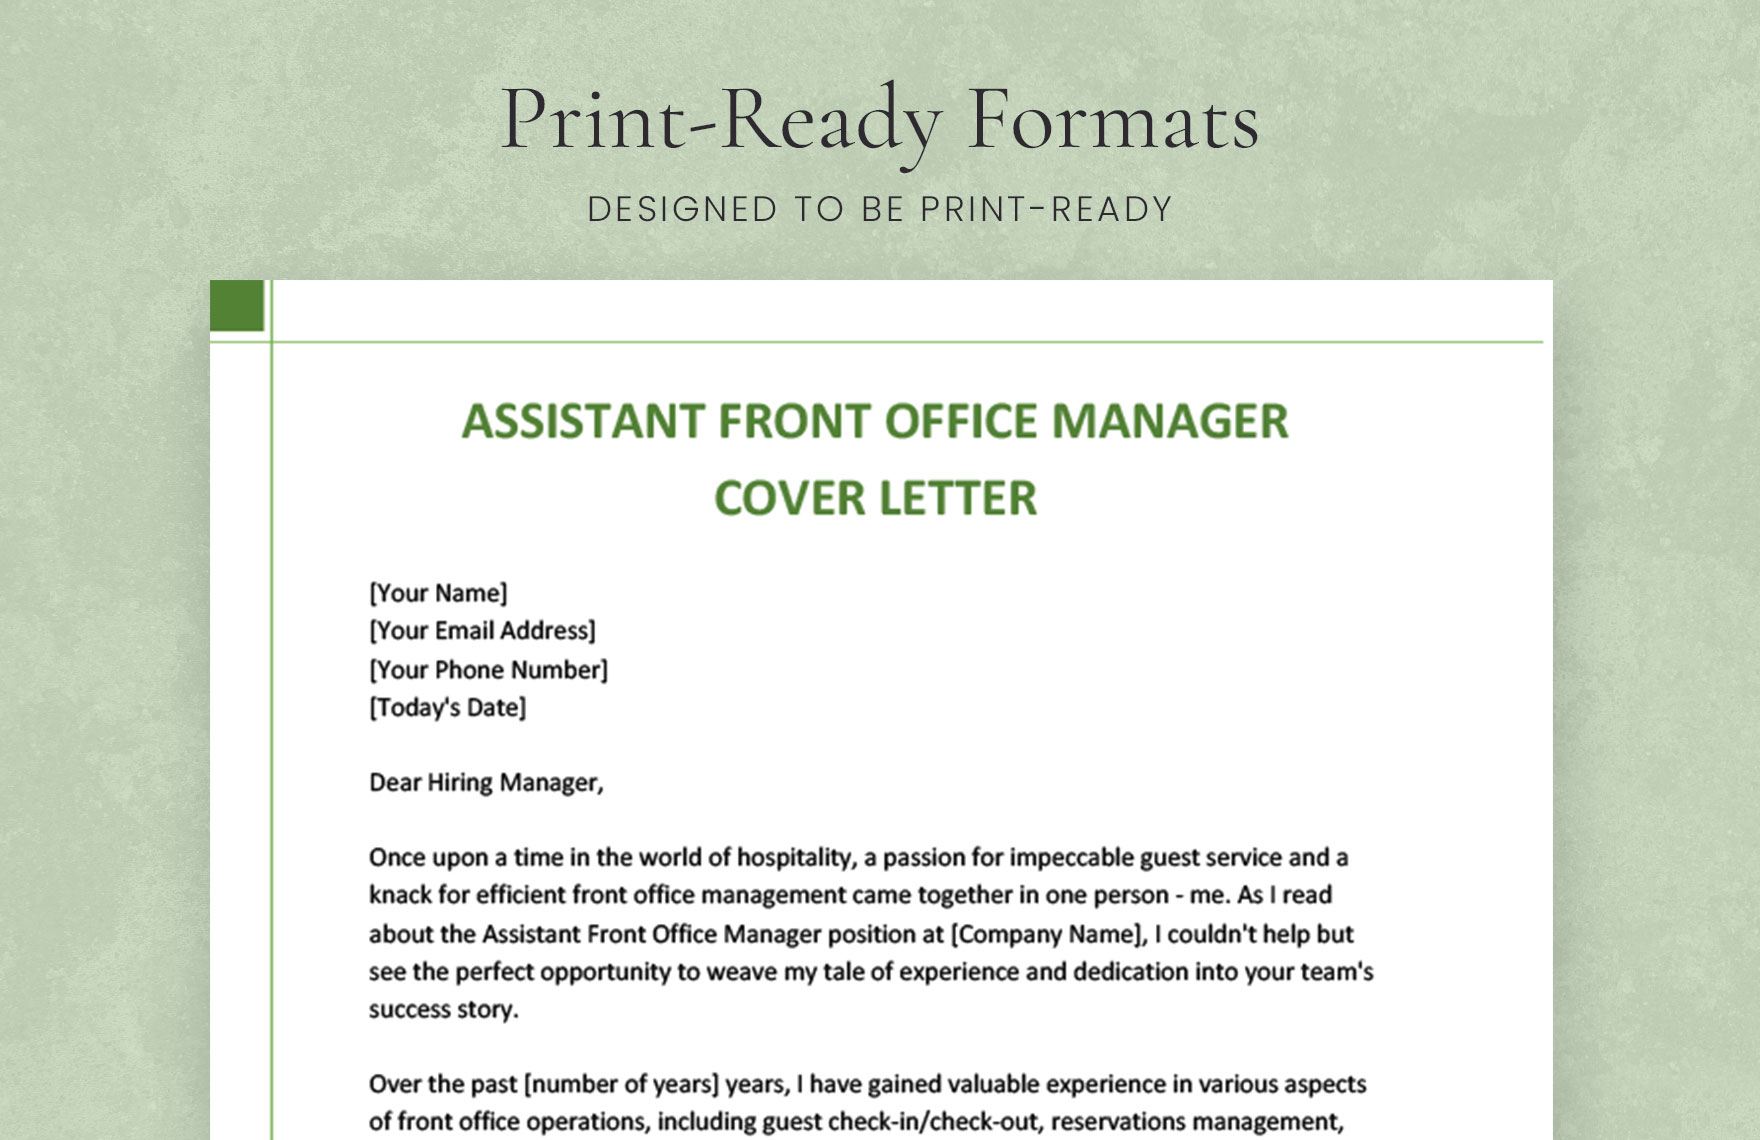 Assistant Front Office Manager Cover Letter